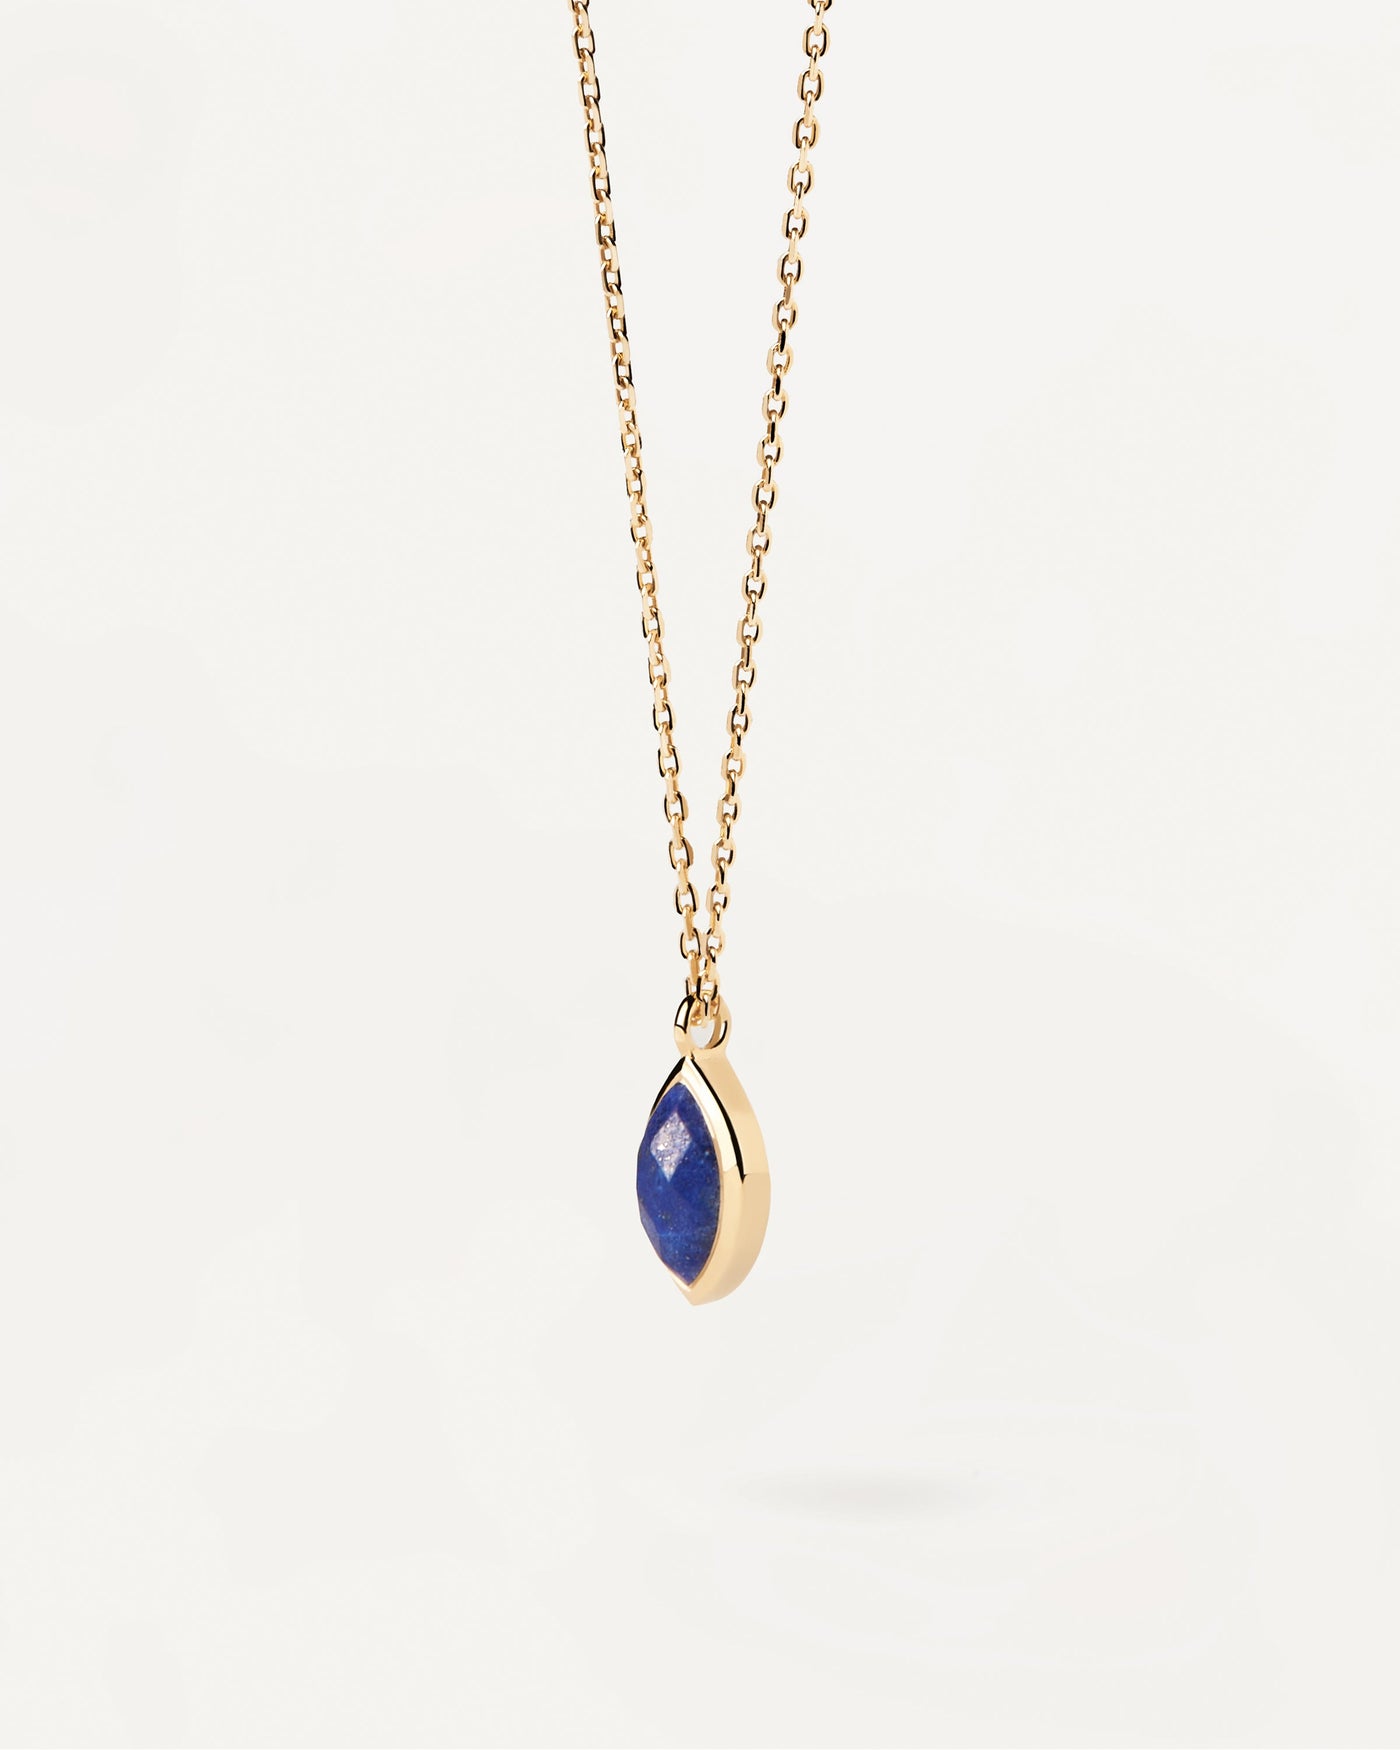 2023 Selection | Lapis Lazuli Nomad Necklace. Gold-plated chain necklace with marquise cut blue gemstone pendant. Get the latest arrival from PDPAOLA. Place your order safely and get this Best Seller. Free Shipping.